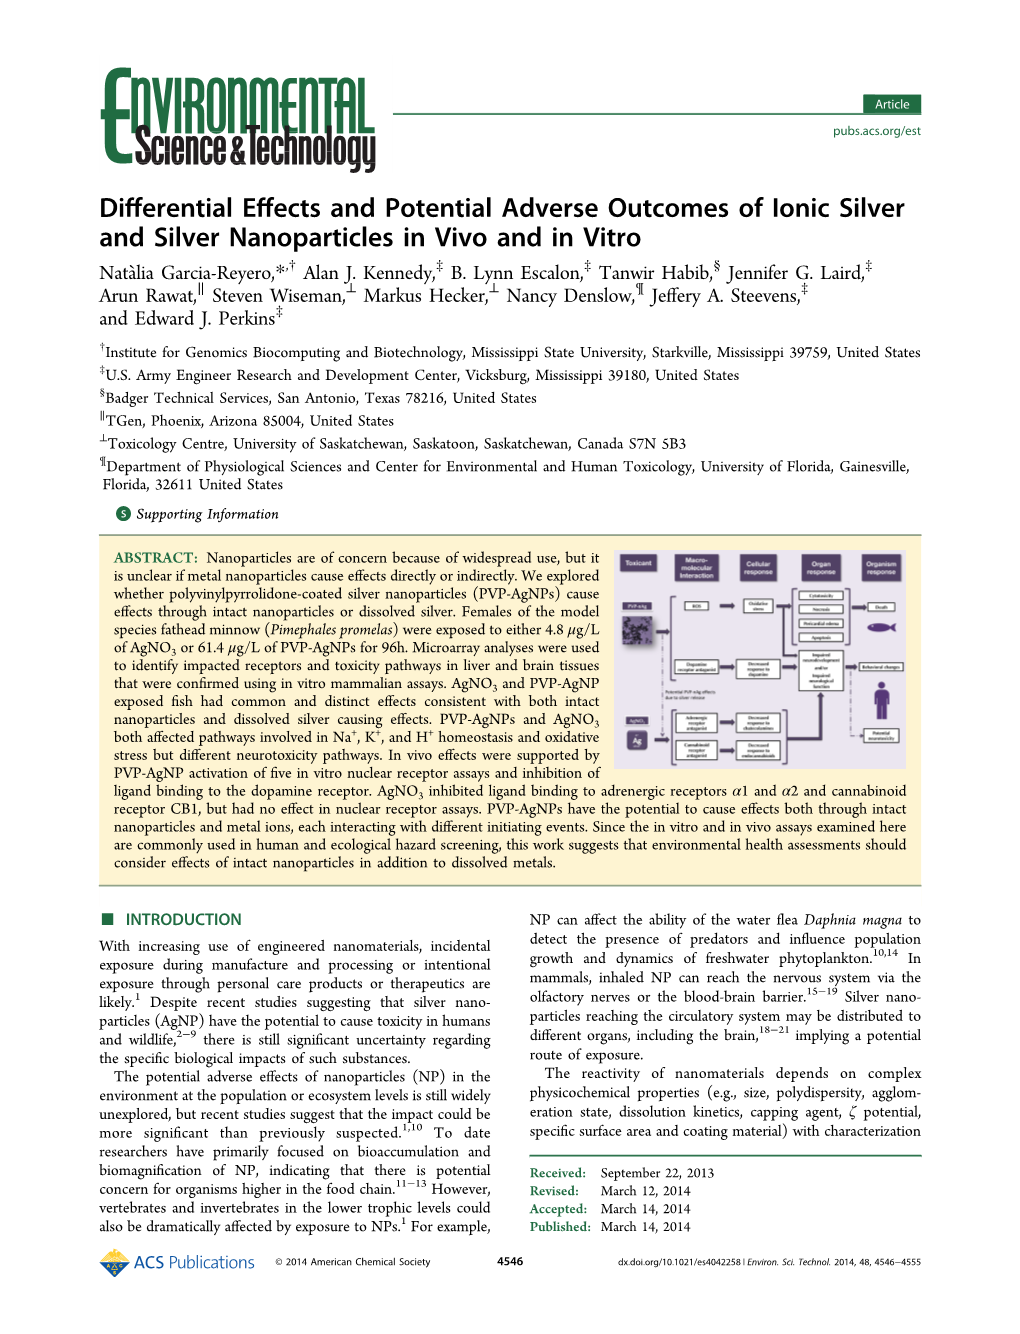 Differential Effects and Potential Adverse Outcomes of Ionic Silver